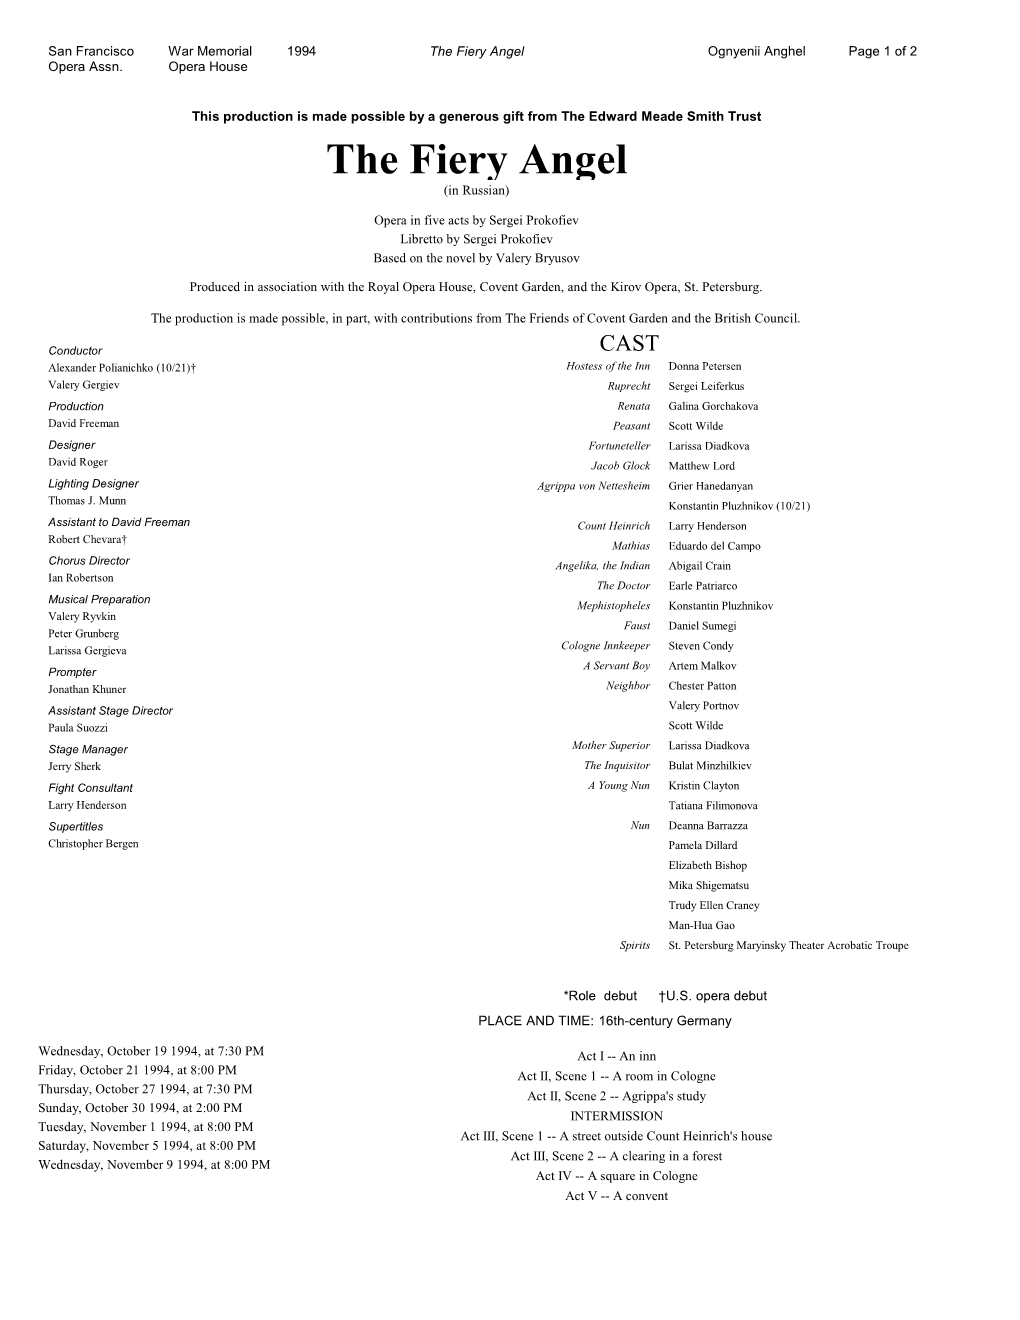 The Fiery Angel Ognyenii Anghel Page 1 of 2 Opera Assn